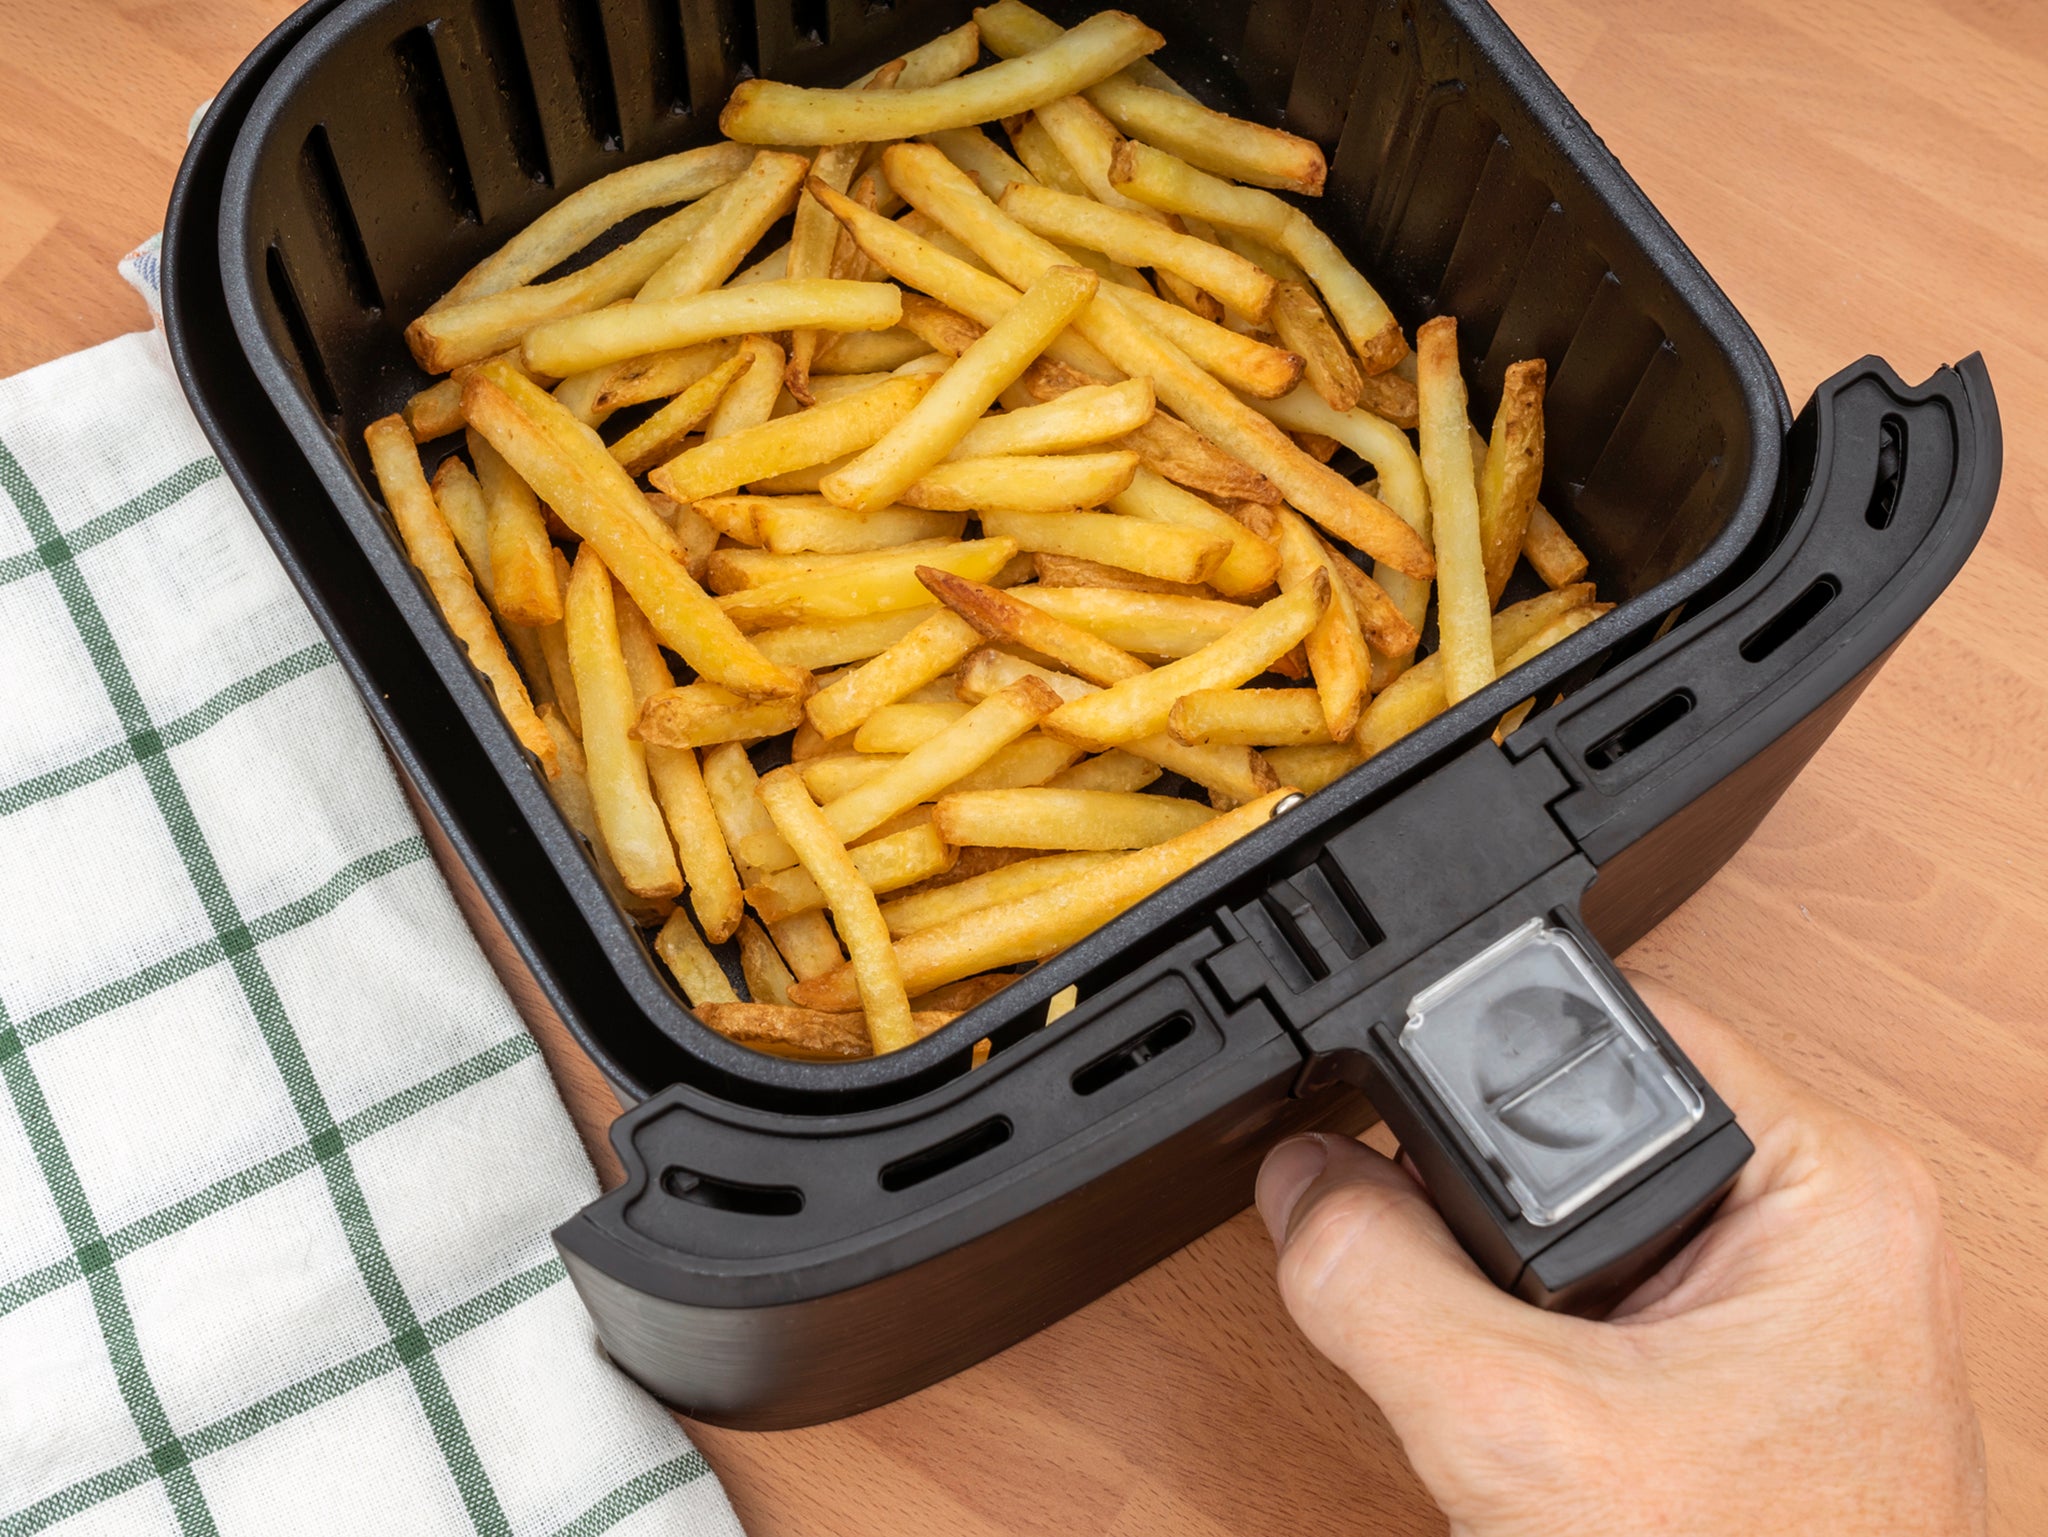 Golden and crispy French fries made to perfection in the air fryer